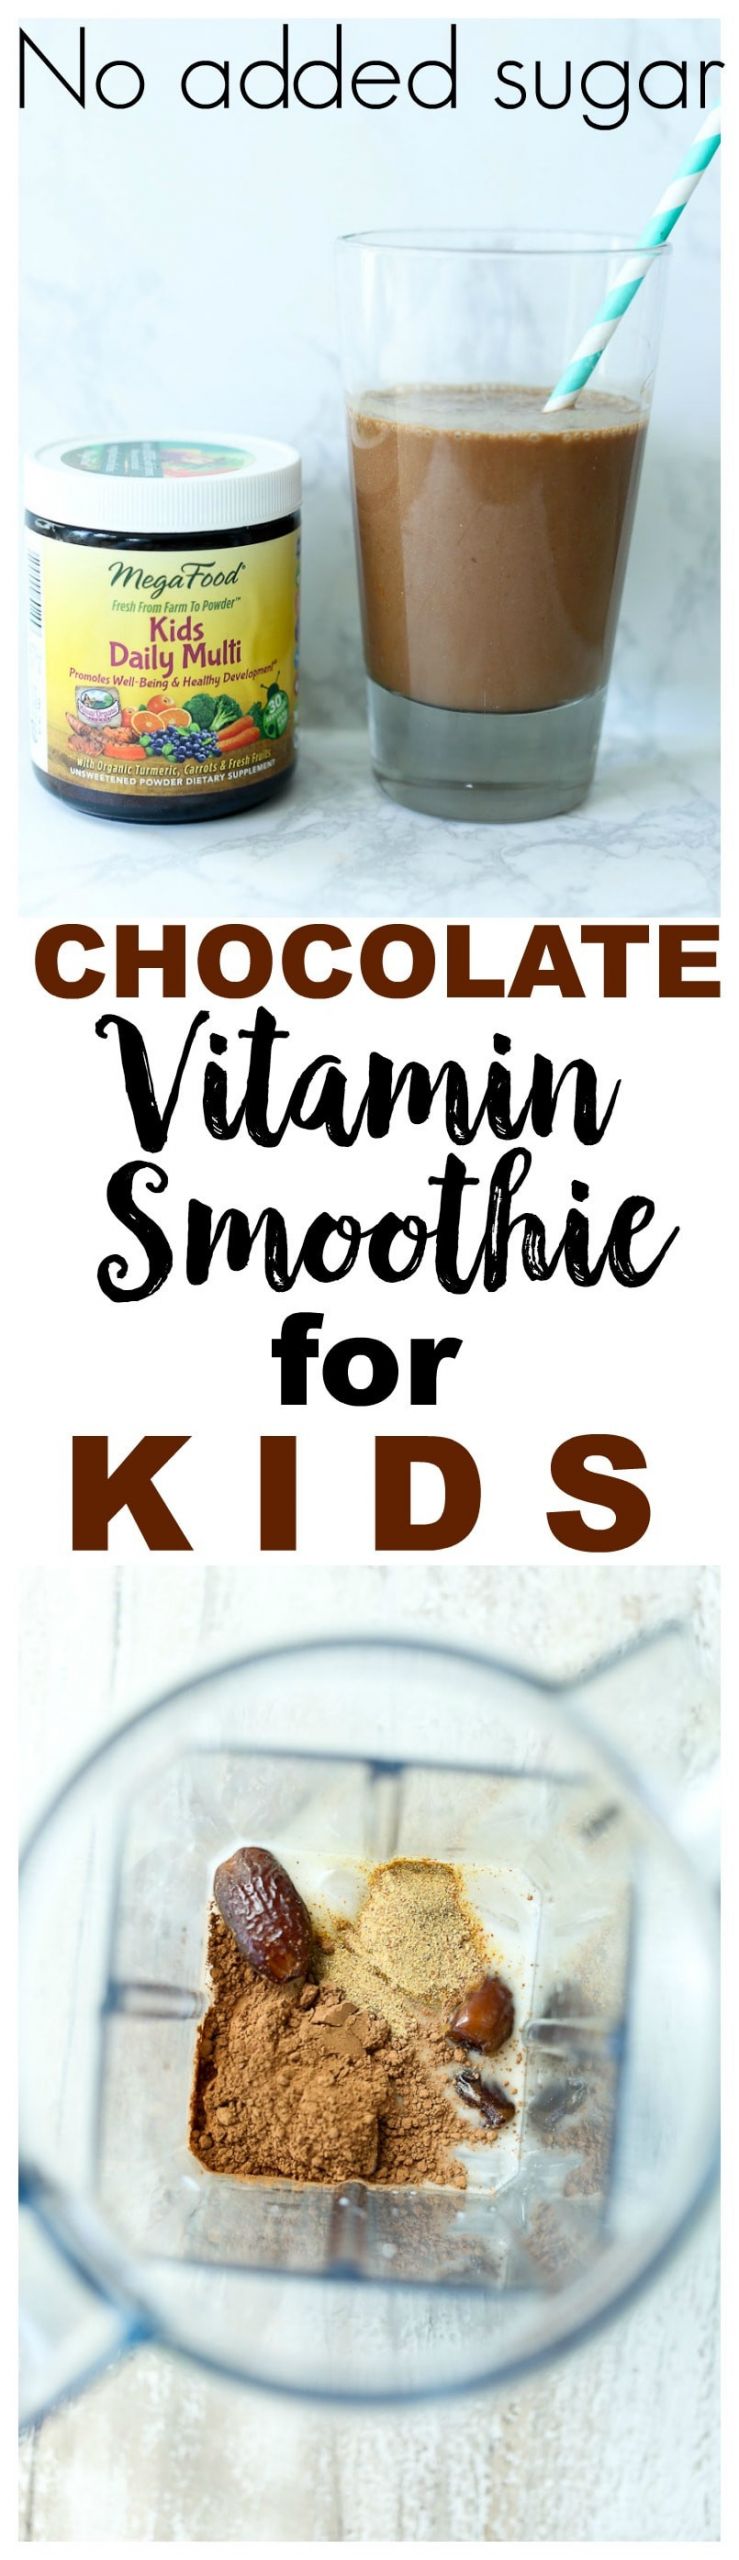 Chocolate Smoothies For Kids
 MegaFood Kids Daily Multi Review Happy Healthy Mama